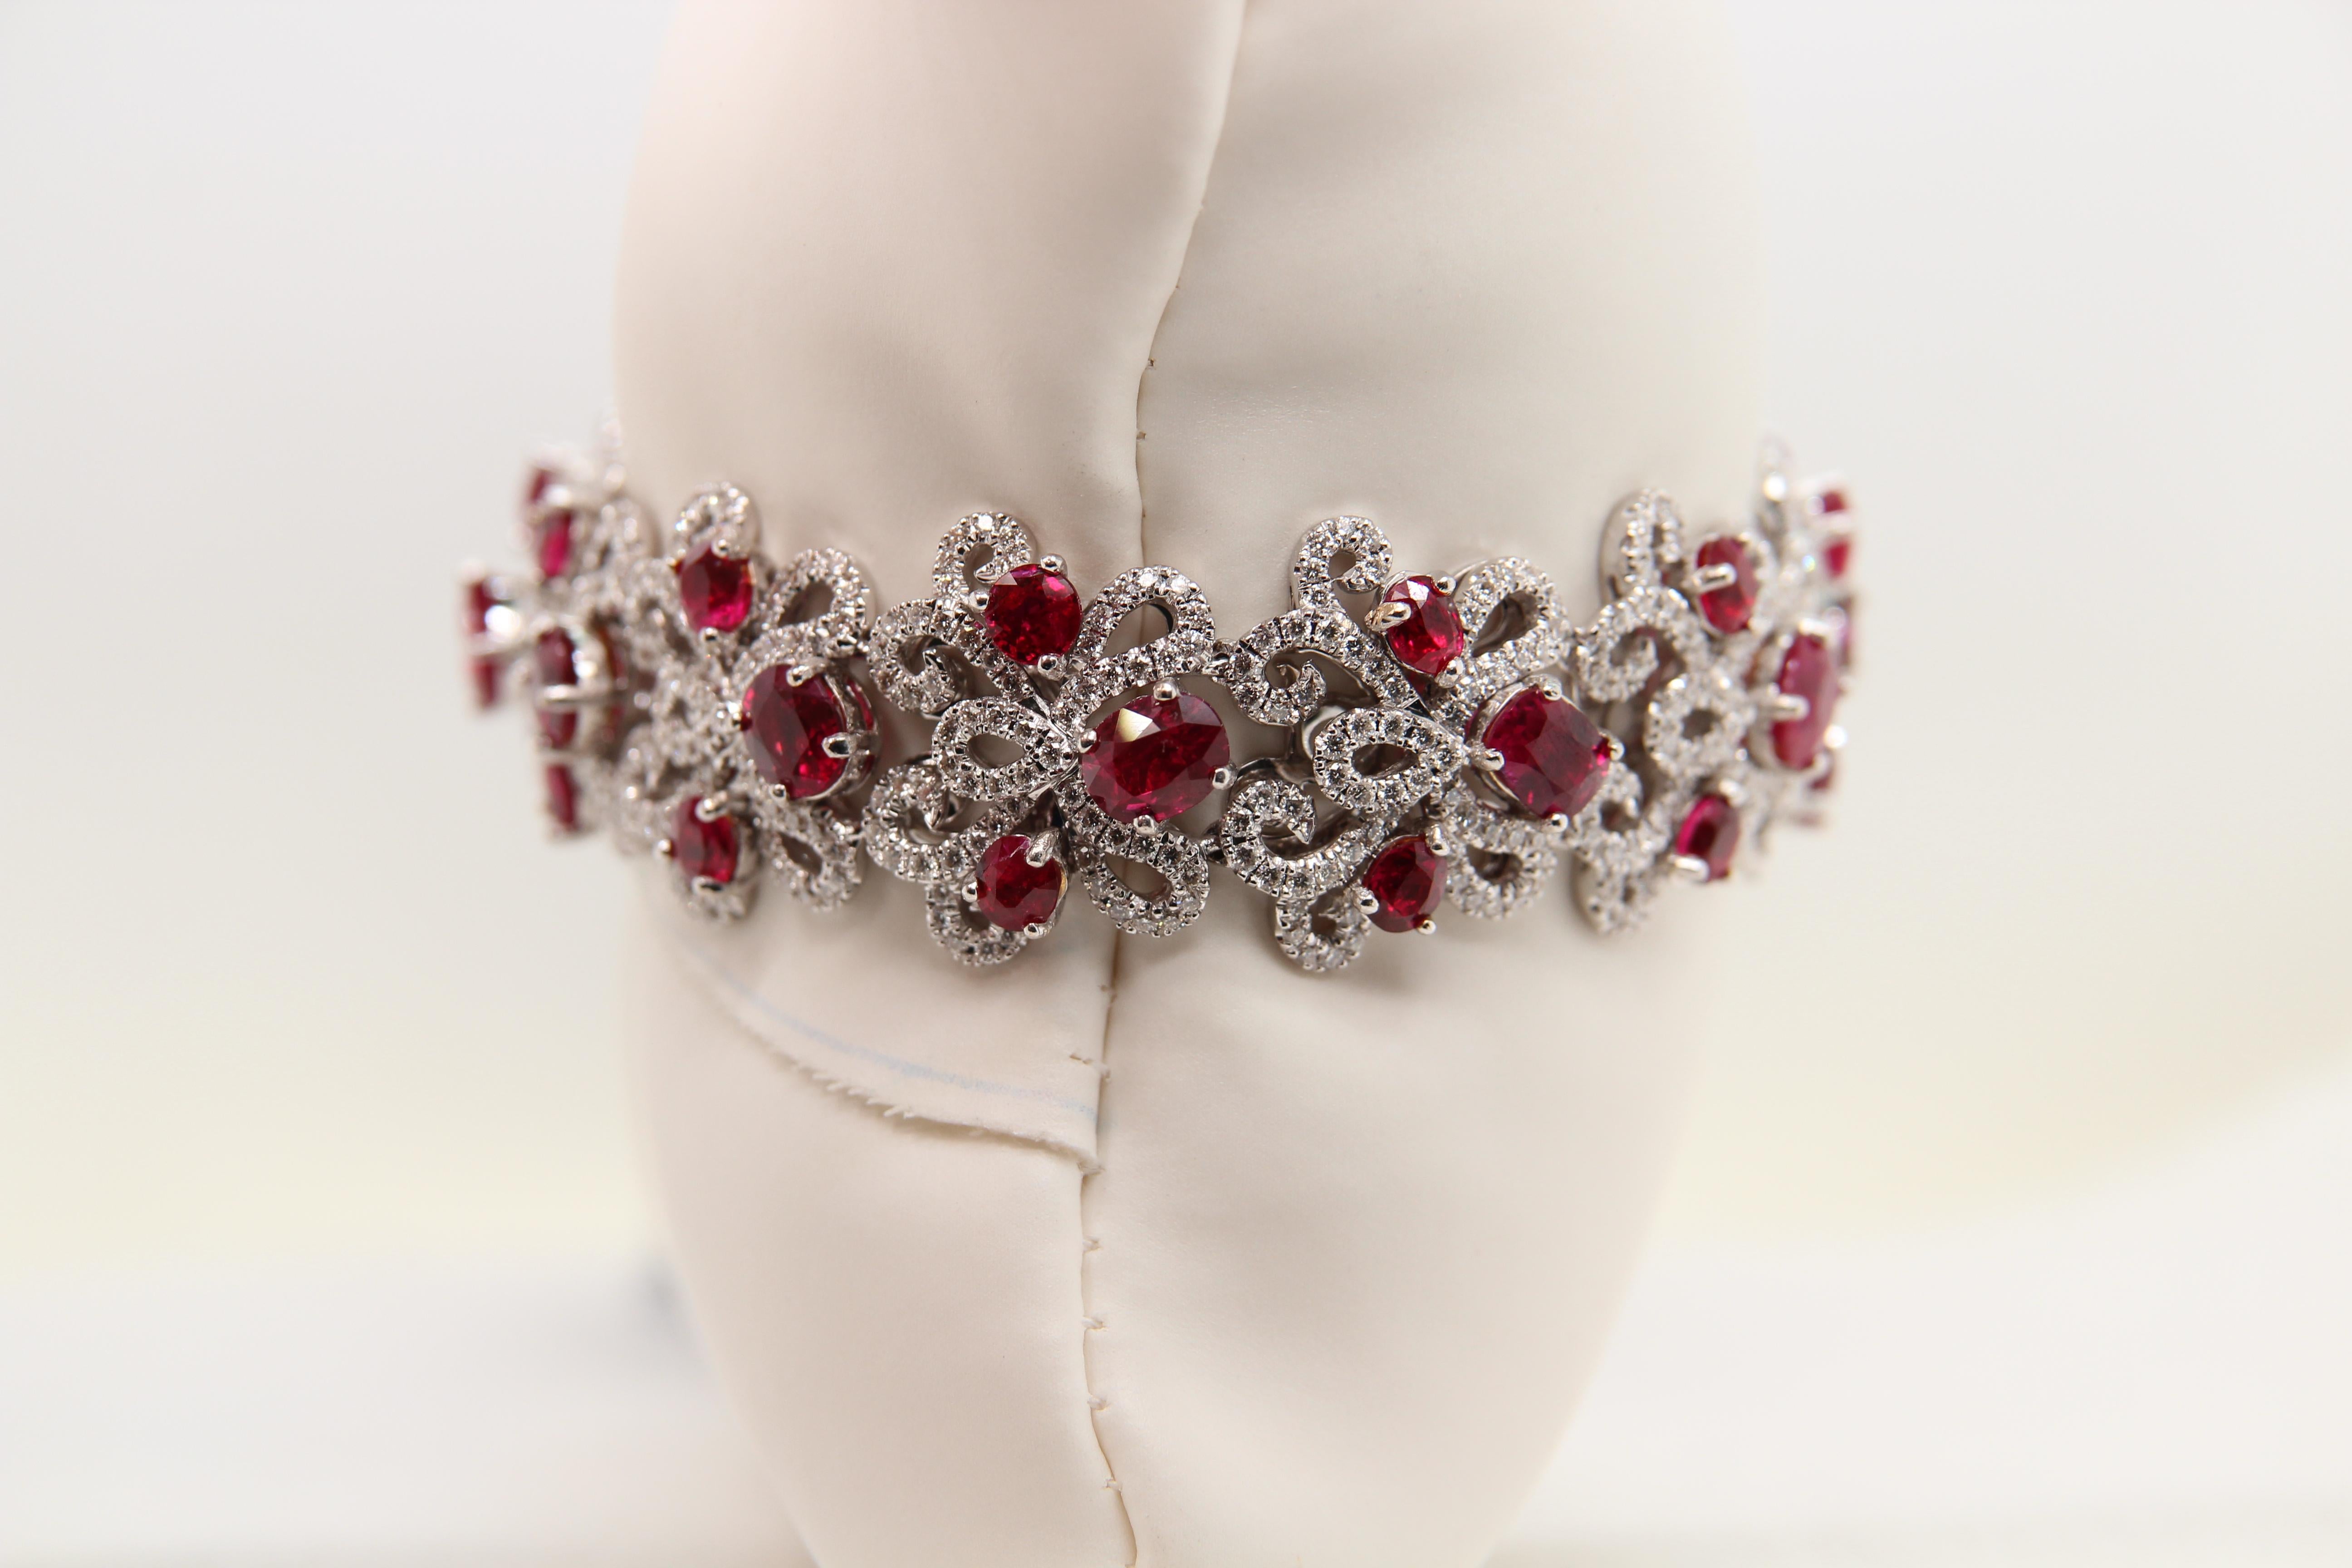 A new ruby and diamond bracelet made in 18 Karat gold. The rubies are all Burmese no heat certified by the International Colorstone Association (ICA) GemLab. The total ruby weight is 16.20 carats and the total diamond weight is 4.70 carats. The